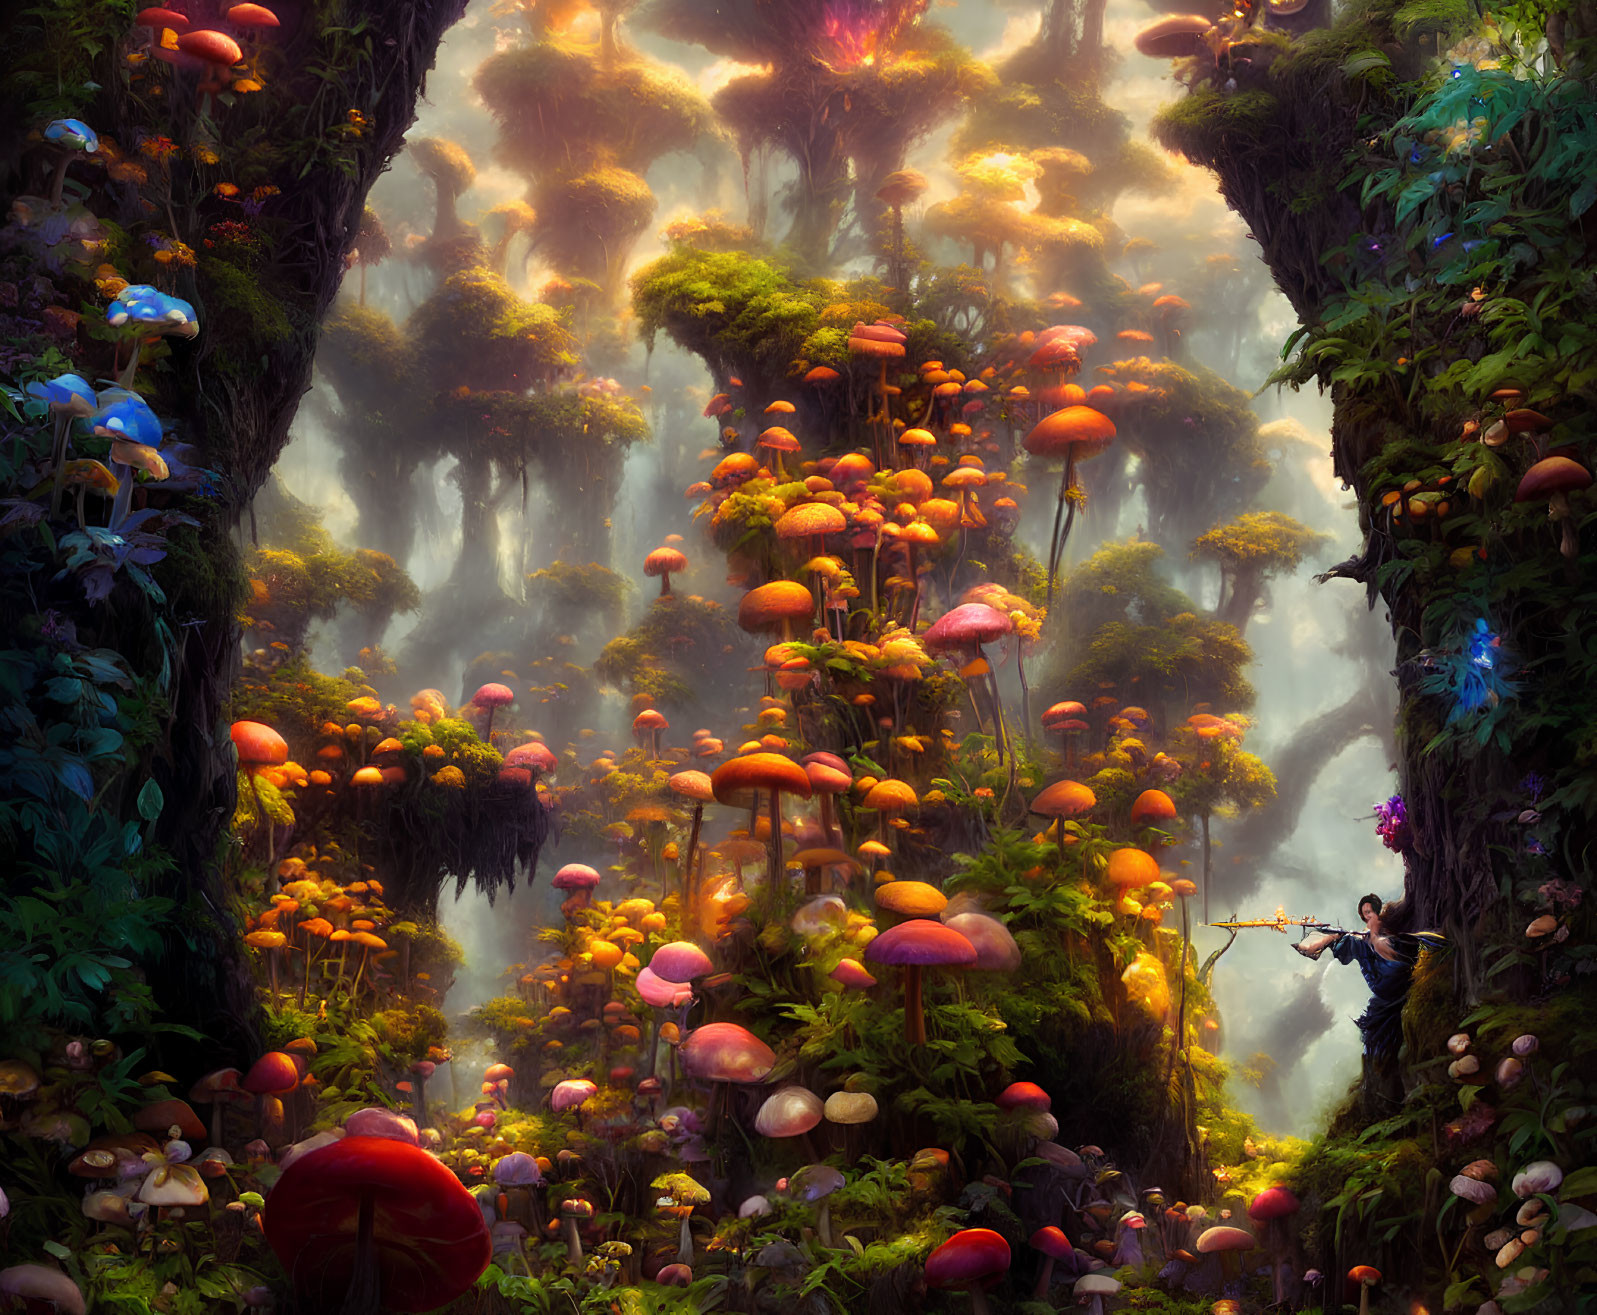 Enchanting forest with towering trees and colorful mushrooms